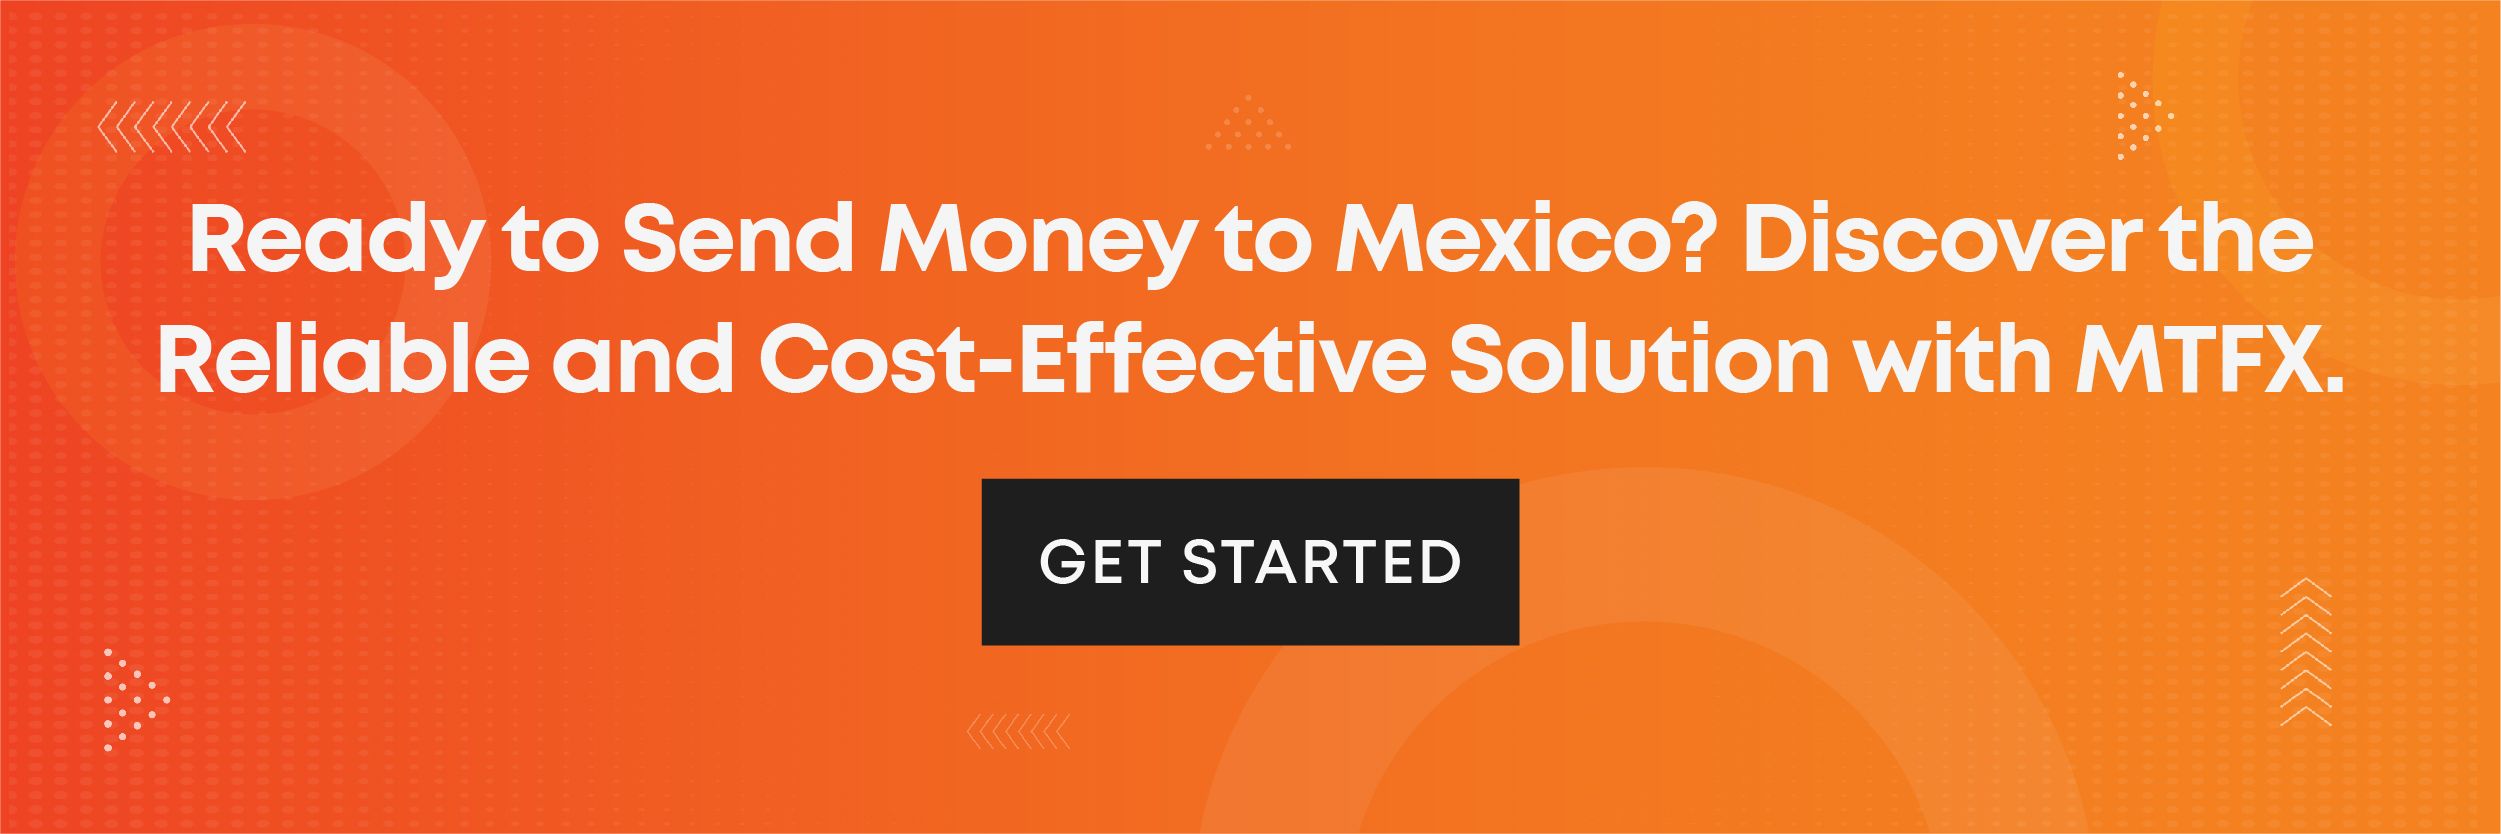 Looking to send money to Mexico?